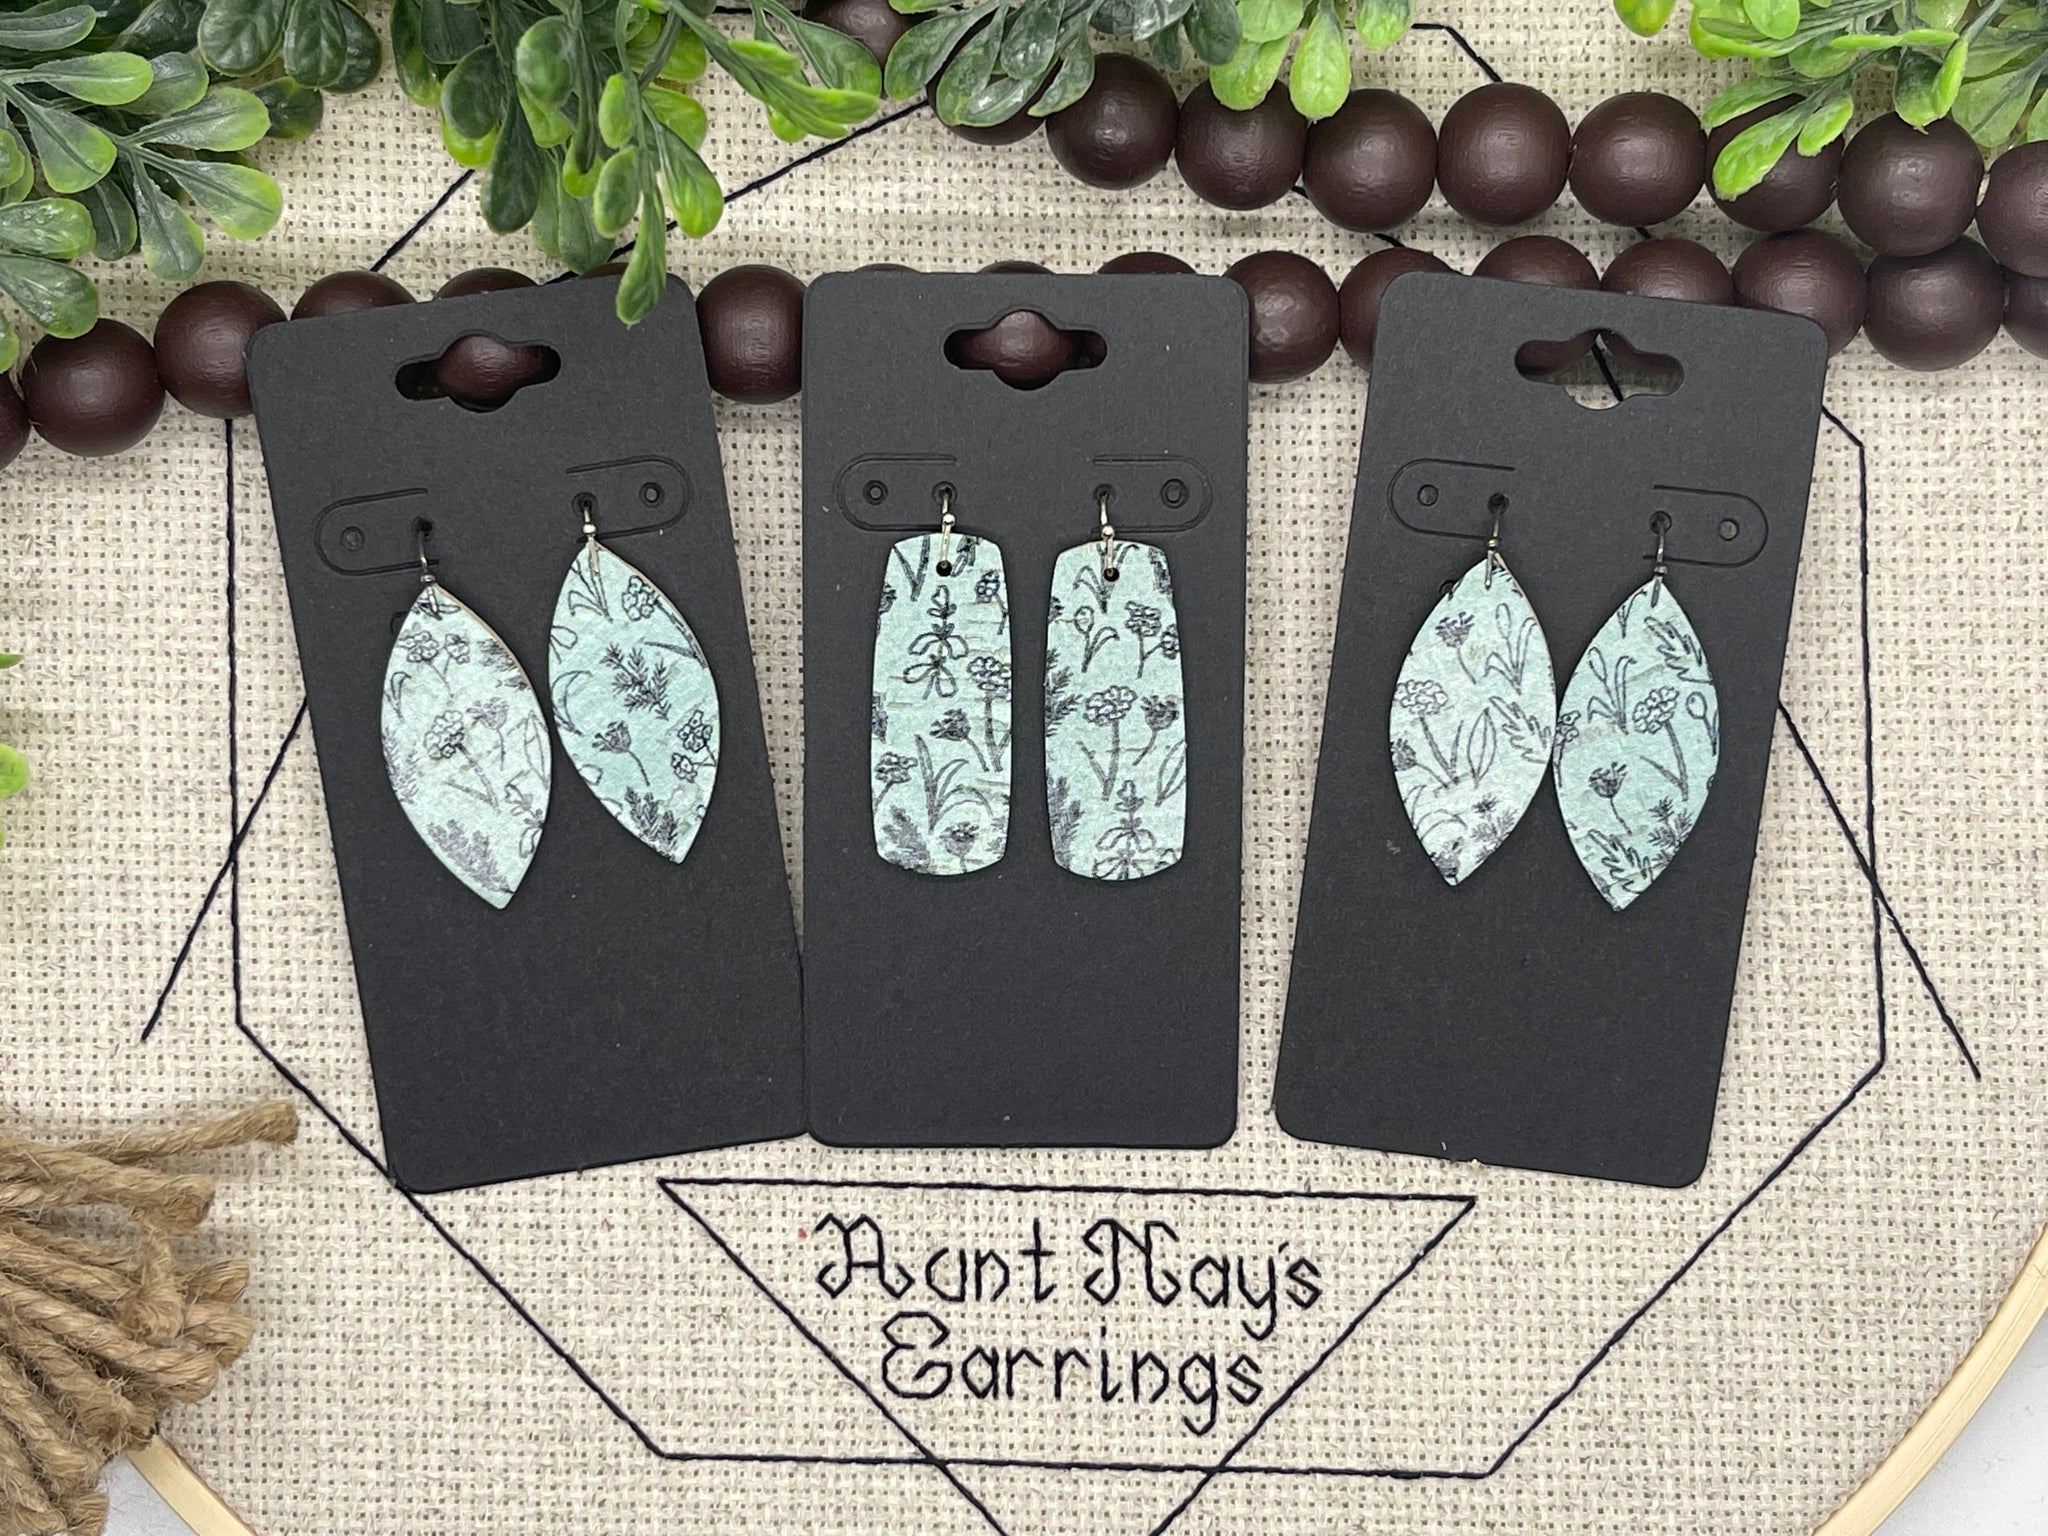 Turquoise Cork with Black Line Drawn Flower Print on Leather Earrings